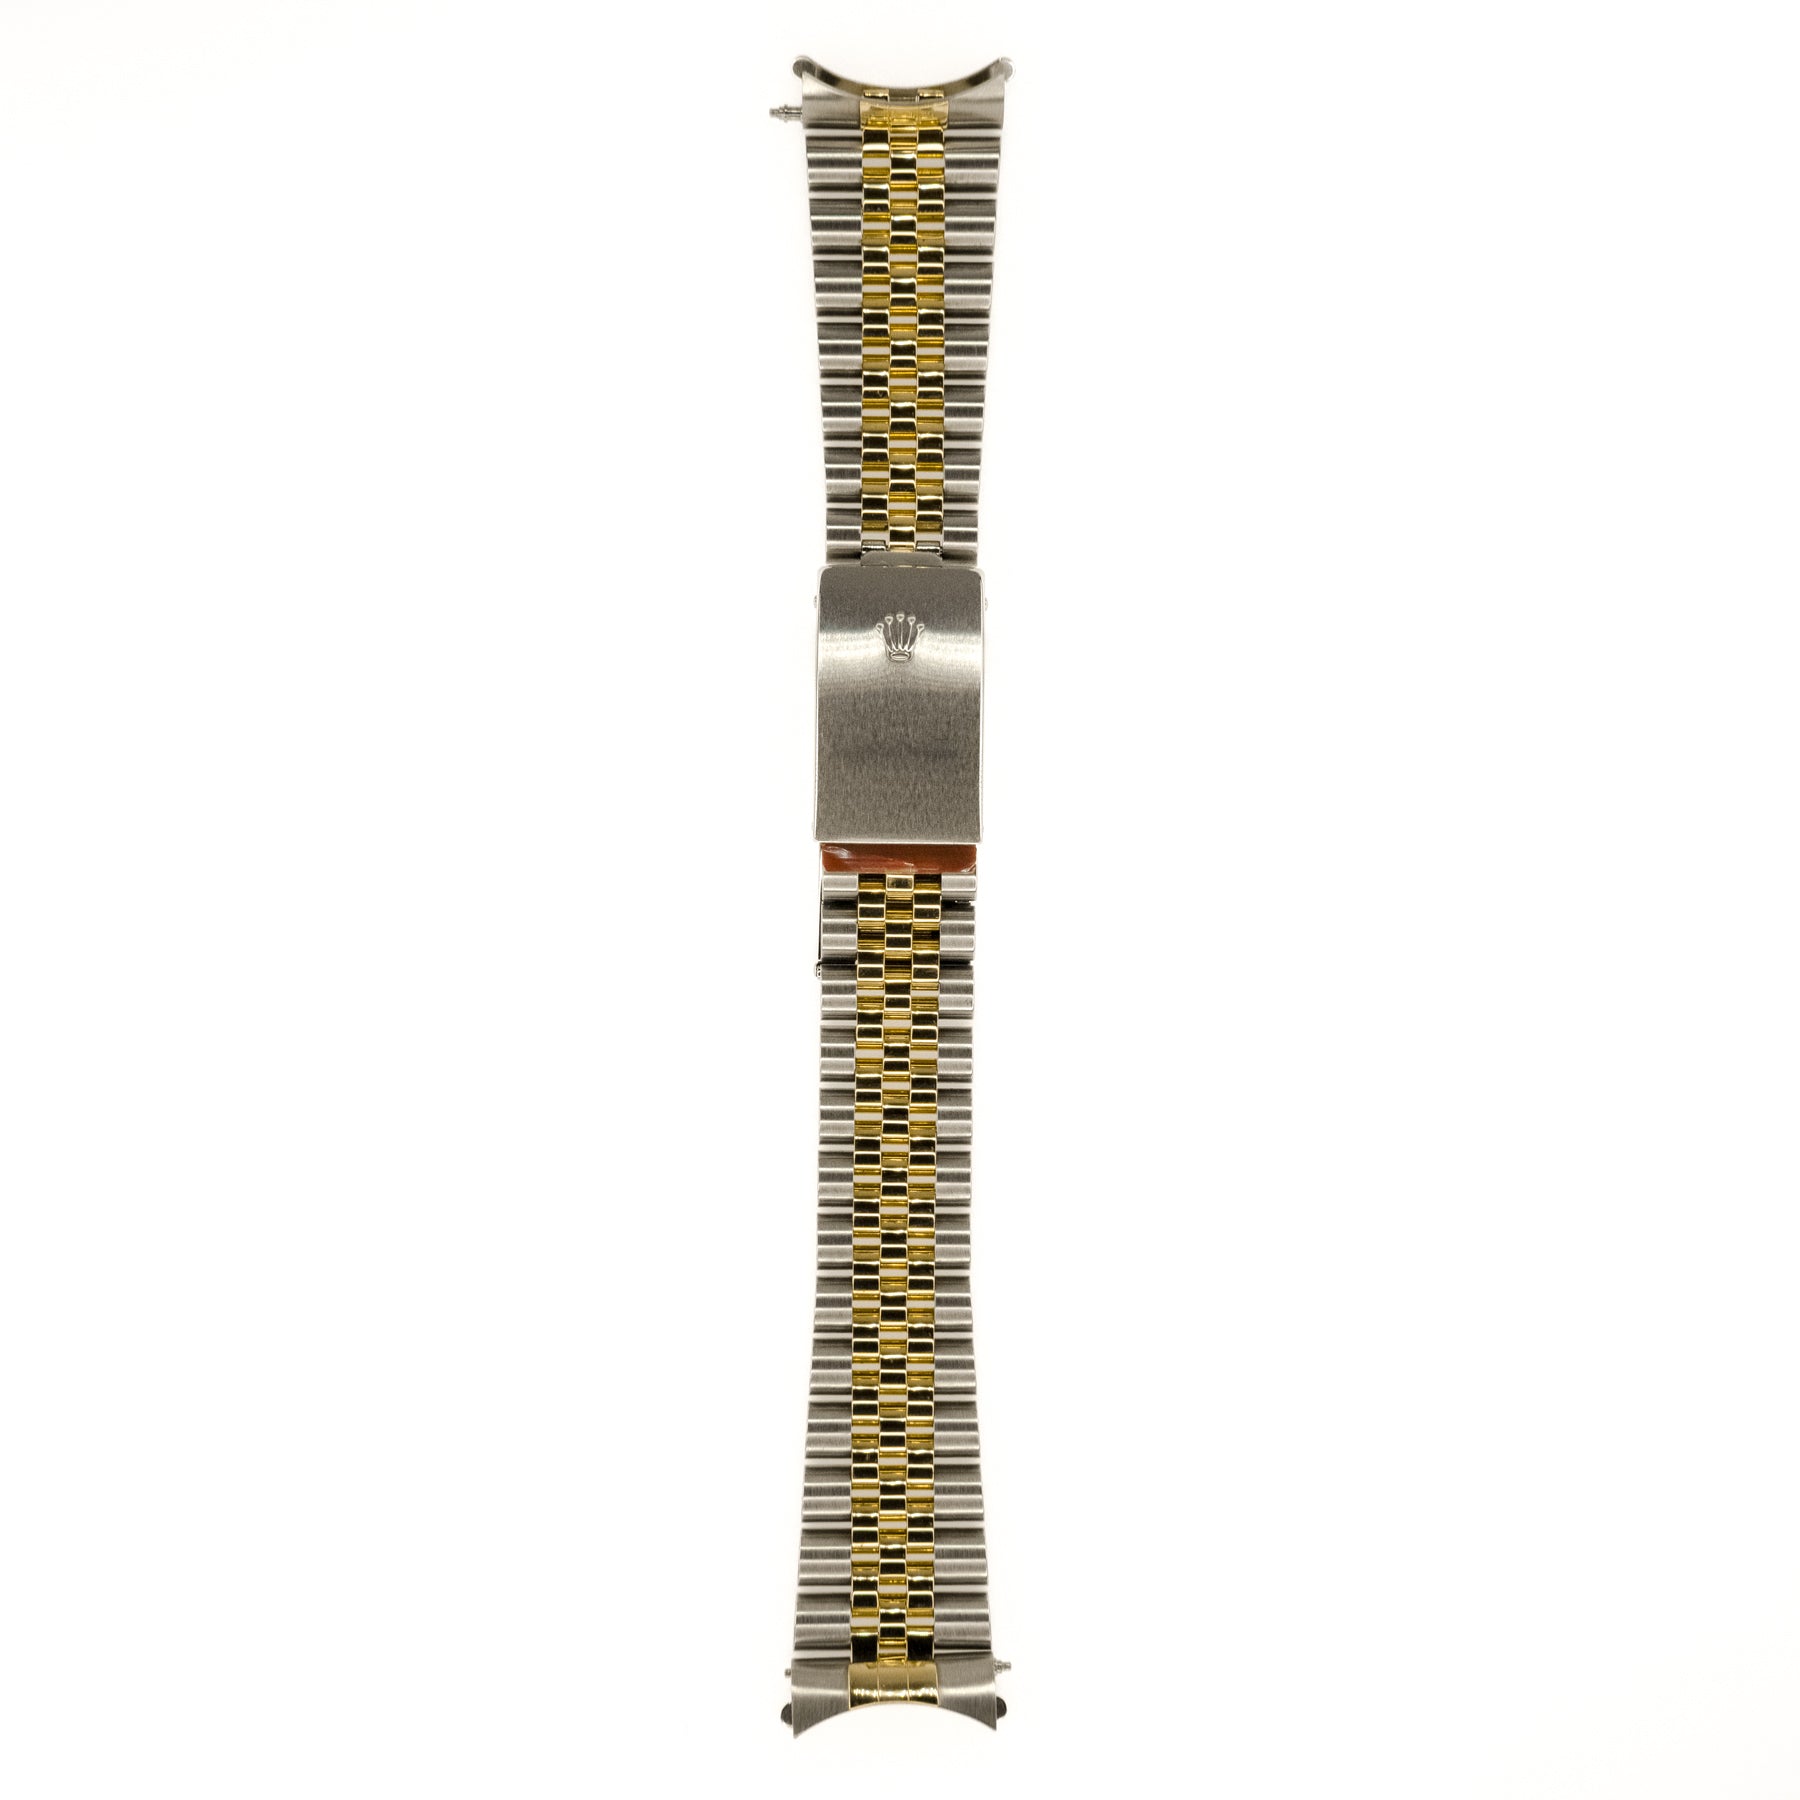 Amazon.com: Ewatchparts 2 END LINK PIECE FOR JUBILEE WATCH BAND 36MM ROLEX  DATEJUST 20MM BRACELET STEEL : Ewatchparts: Clothing, Shoes & Jewelry